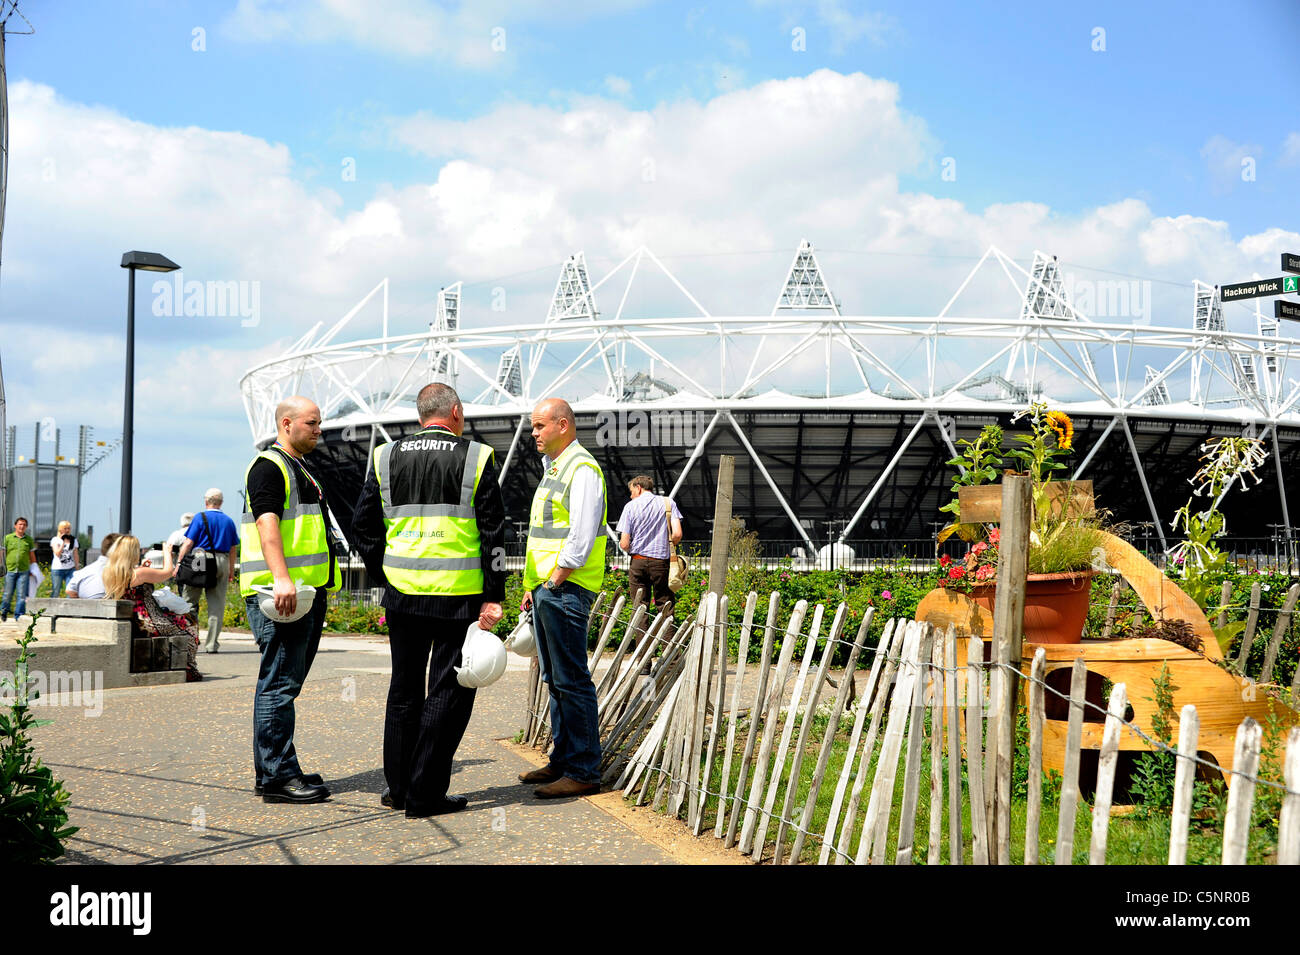 2012 Summer Olympic Venue security staff talking on footpath Stock Photo